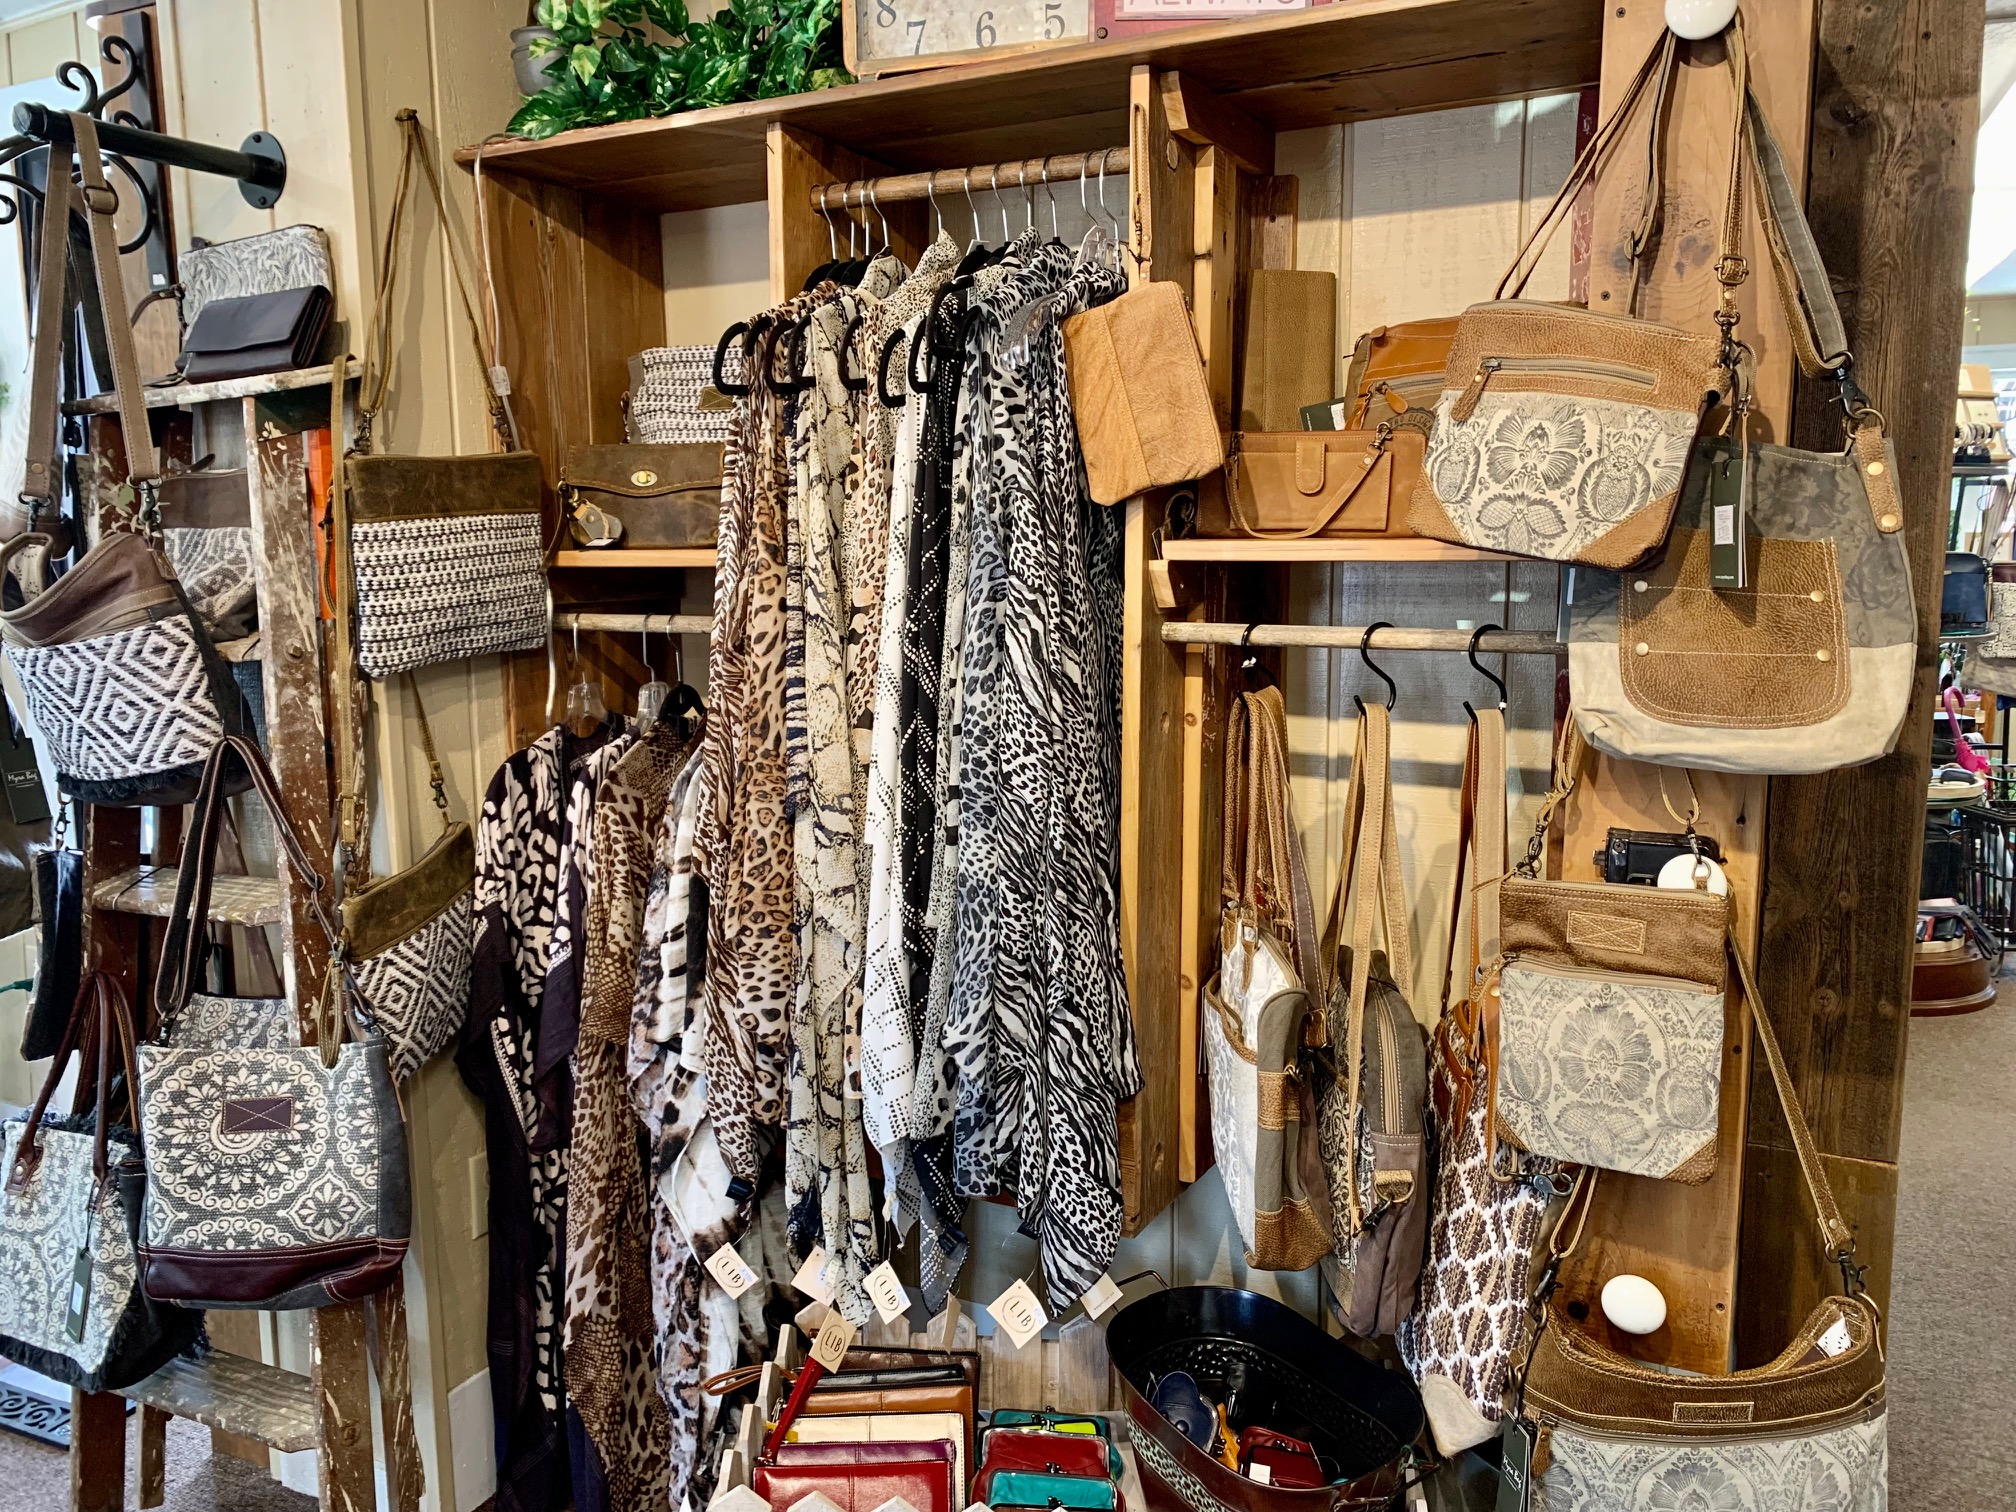 Clothing and bags on display in store